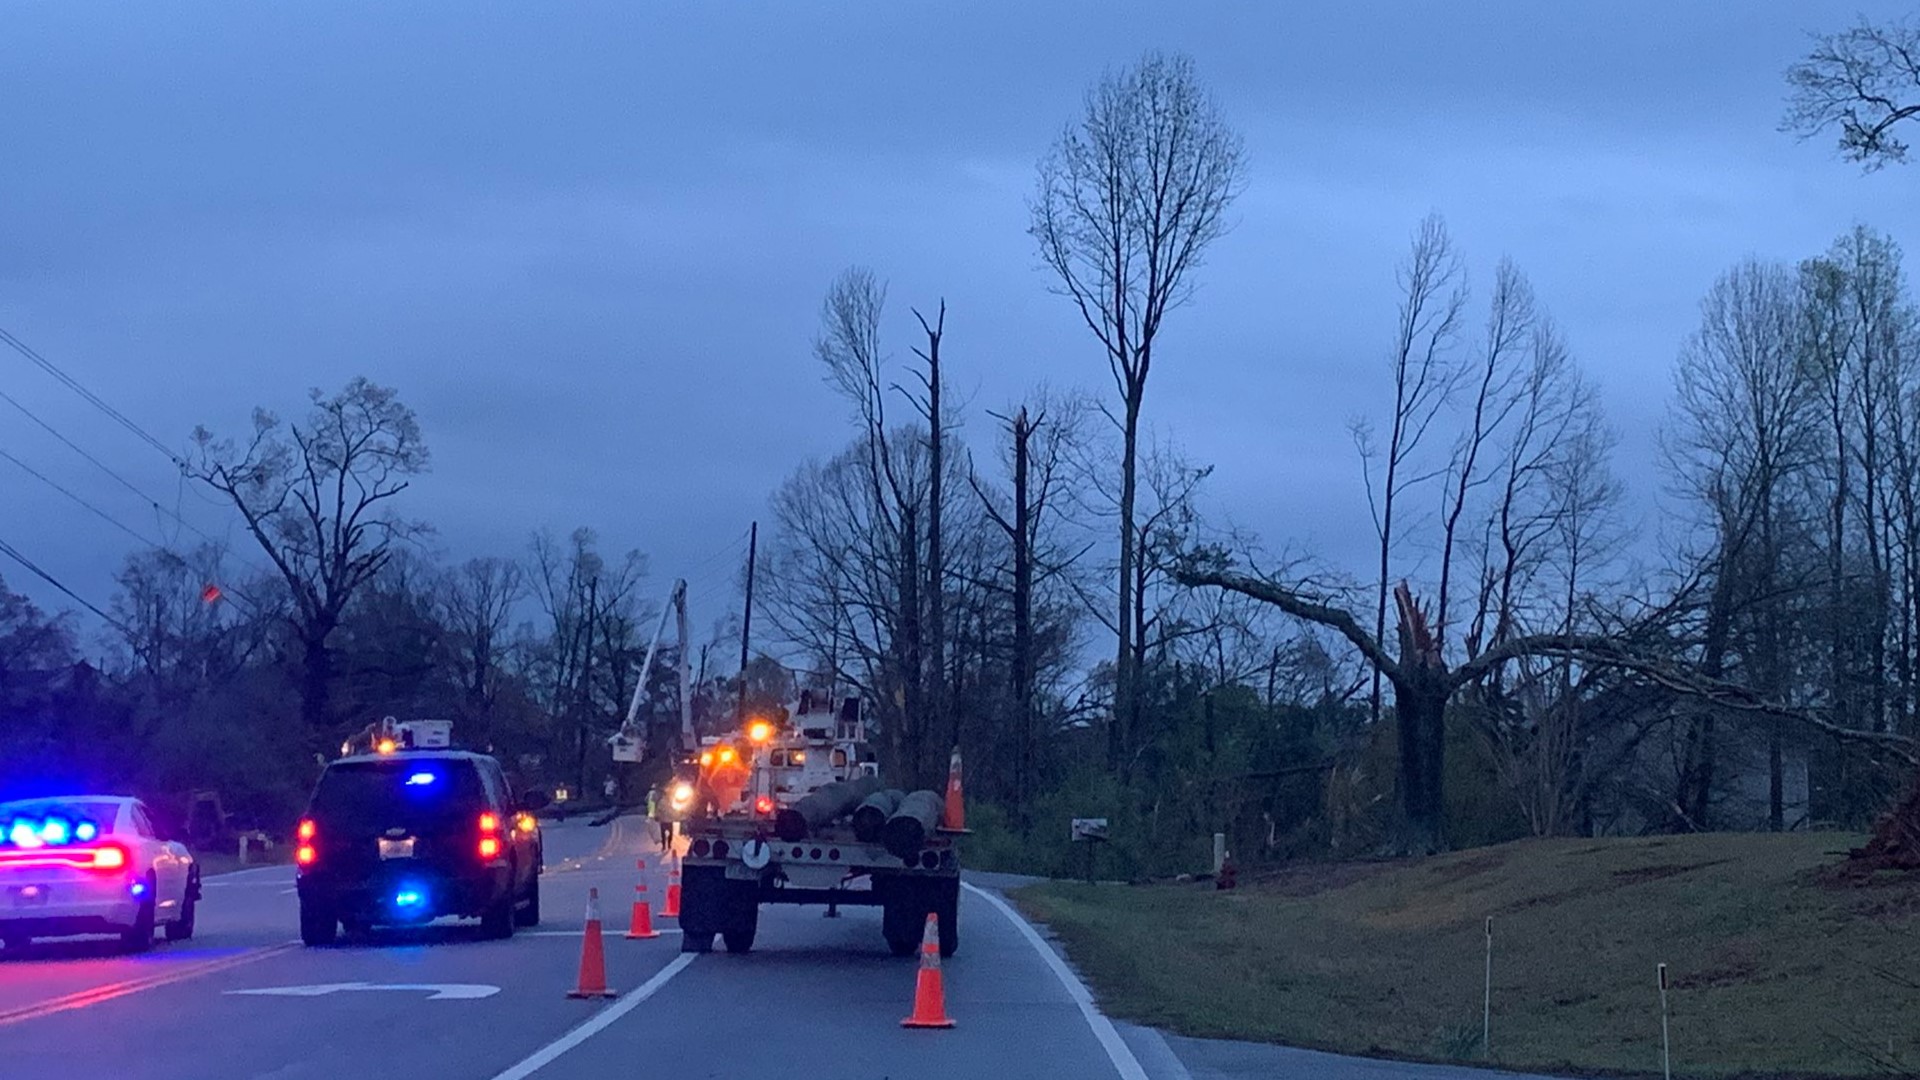 The person who died during severe weather in Coweta County was trapped by trees after having a medical emergency, Coweta County Fire Chief Pat Wilson said